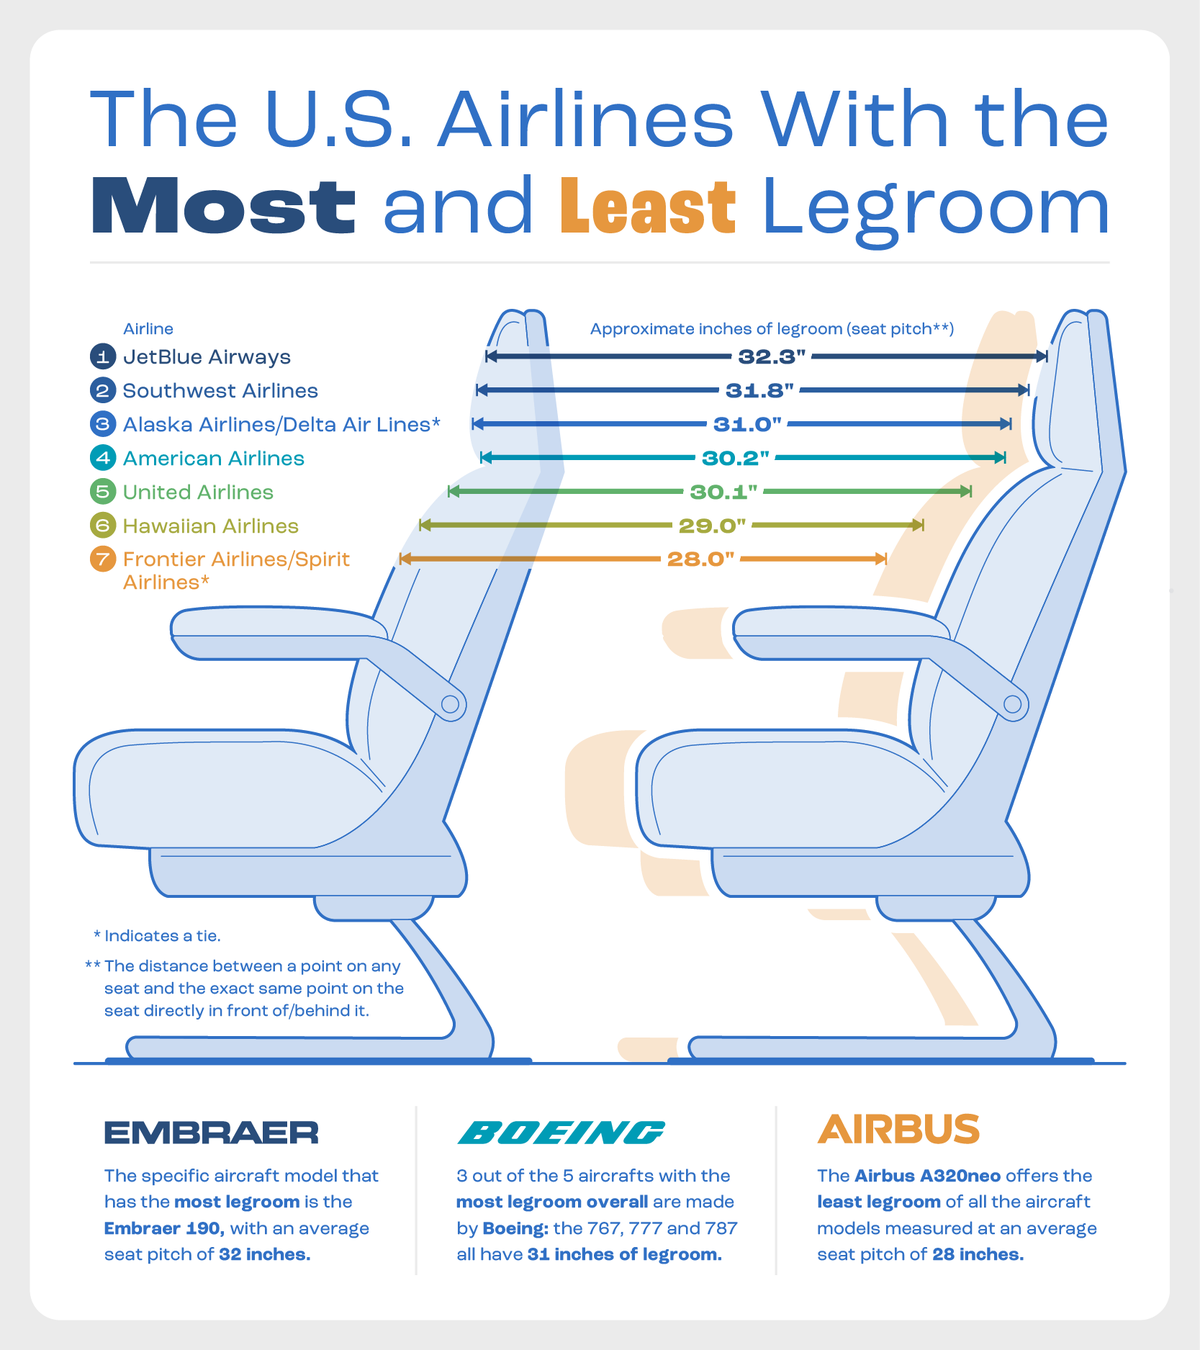 US Airlines With the Most and Least Legroom